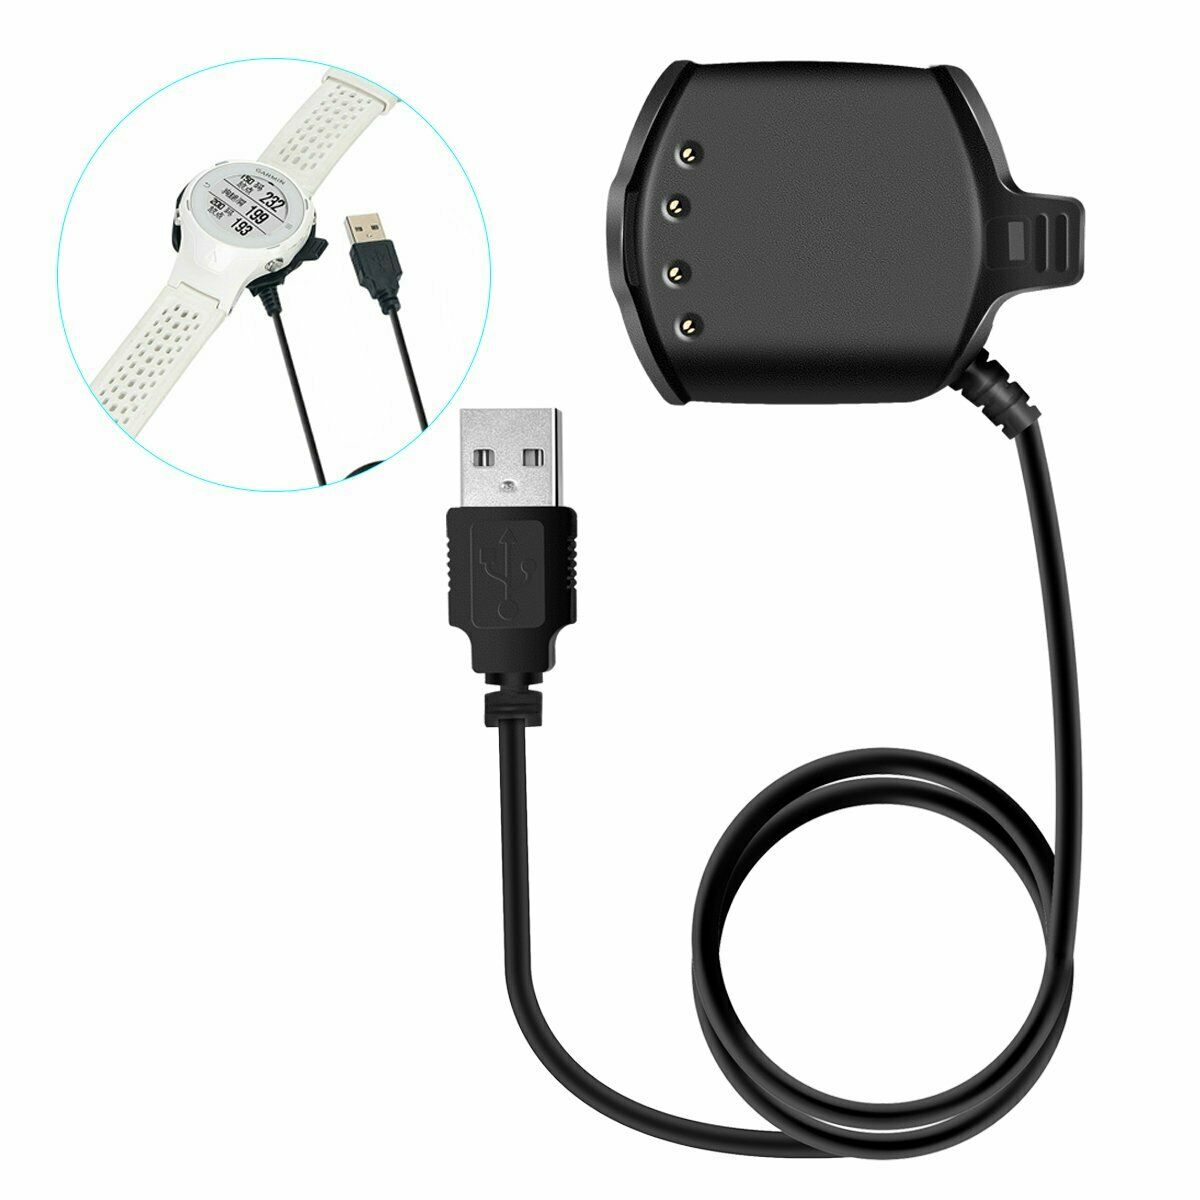 USB Charging & Data Cable Cradle For Garmin Approach S2/Approach S4 Watch Part